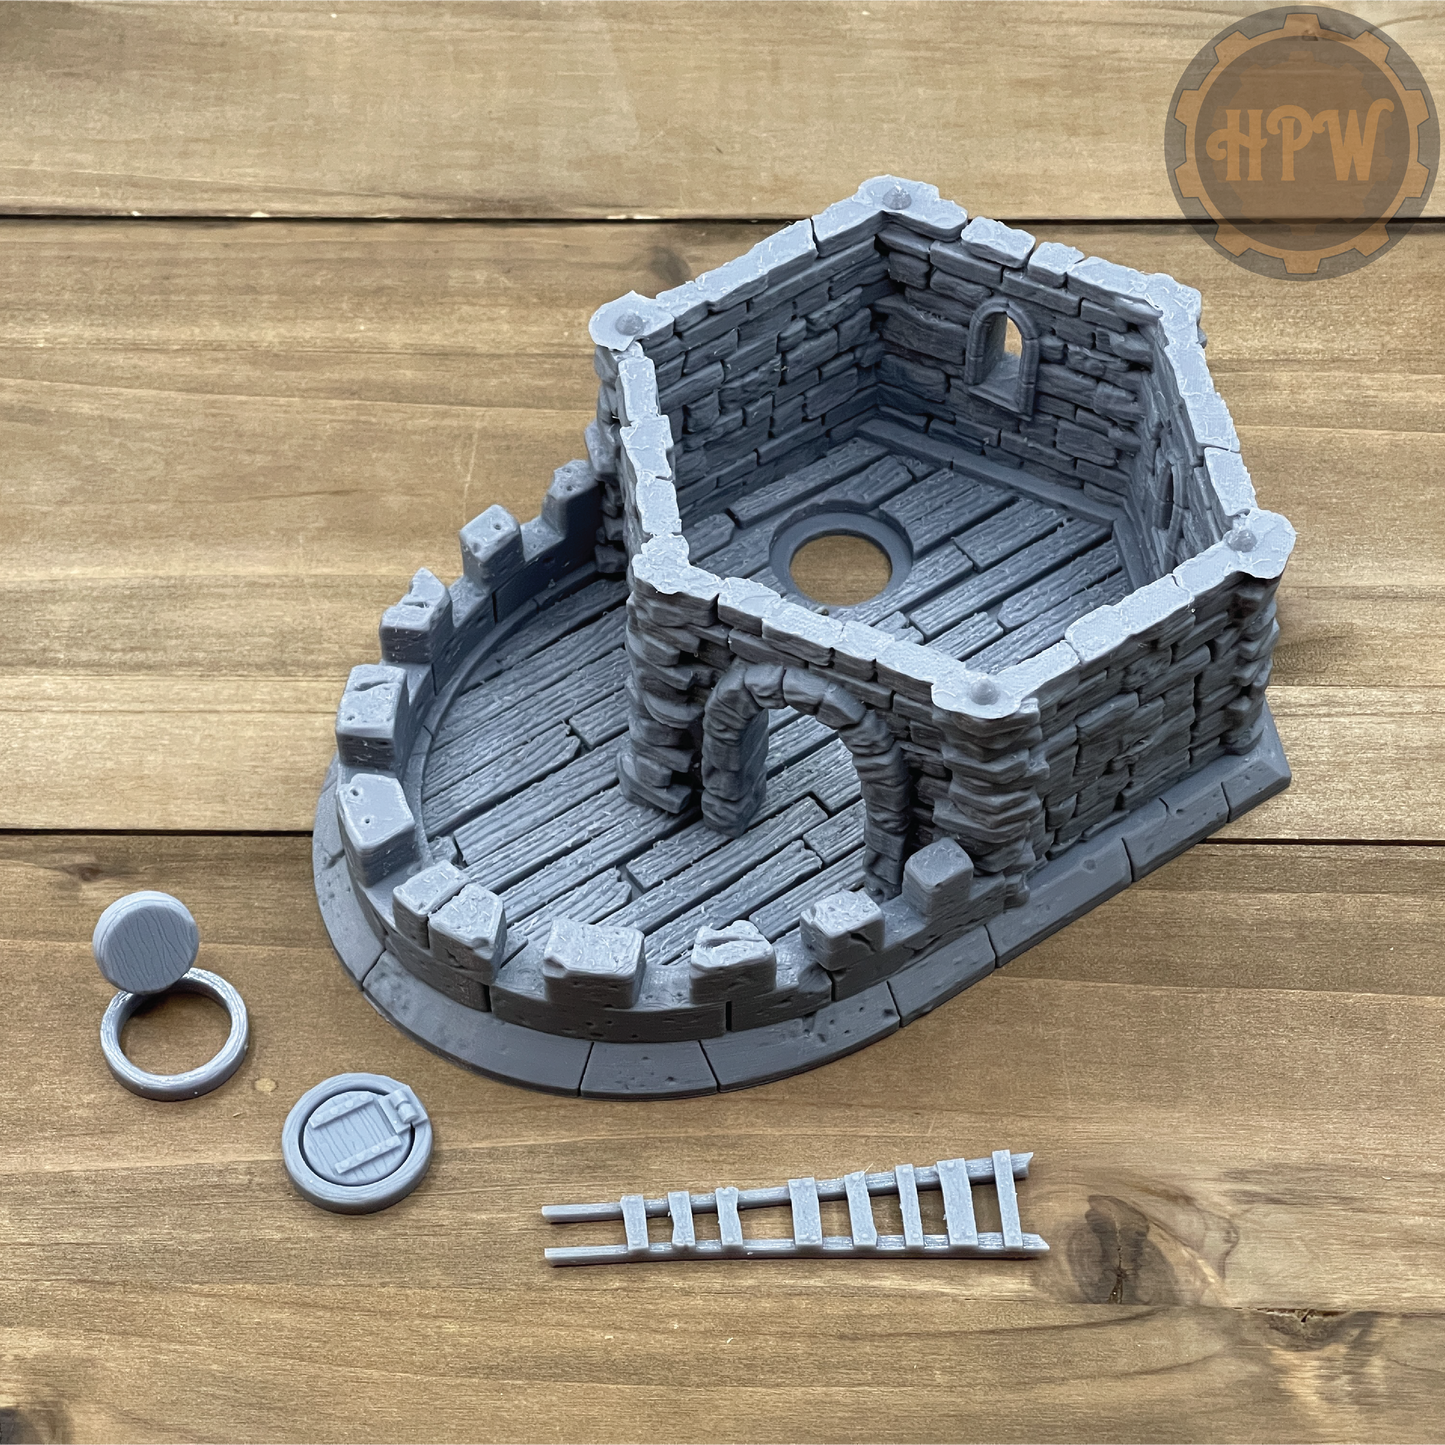 Lighthouse | Beacon Tower | Miniature Gaming Terrain Kit | GameScape3D | Sea Stack Cove